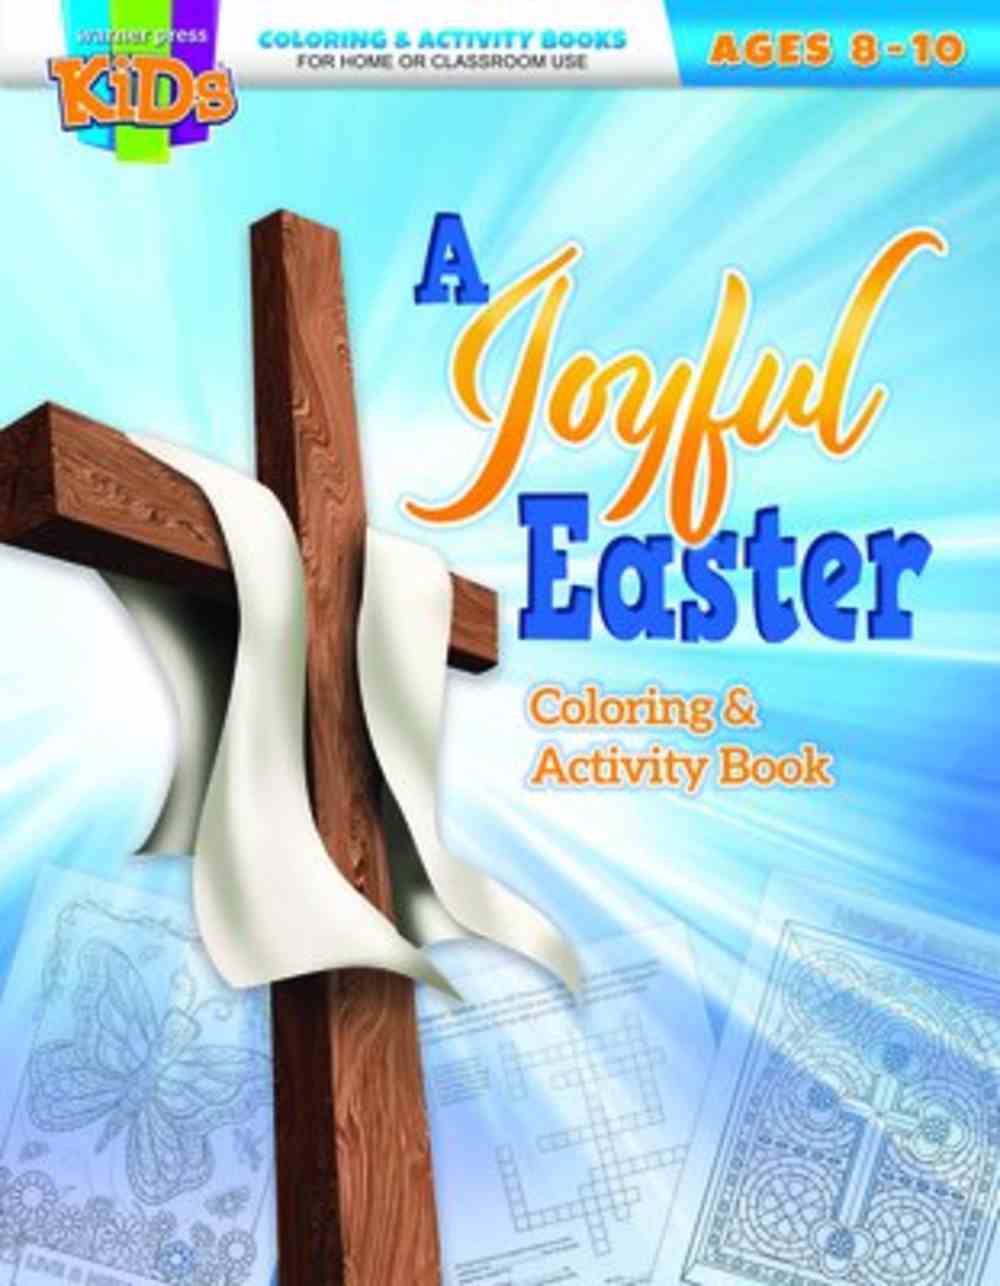 Joyful Easter, A: Coloring & Activity Book (Ages 8-10, NIV) (Warner Press Colouring & Activity Books Series) Paperback